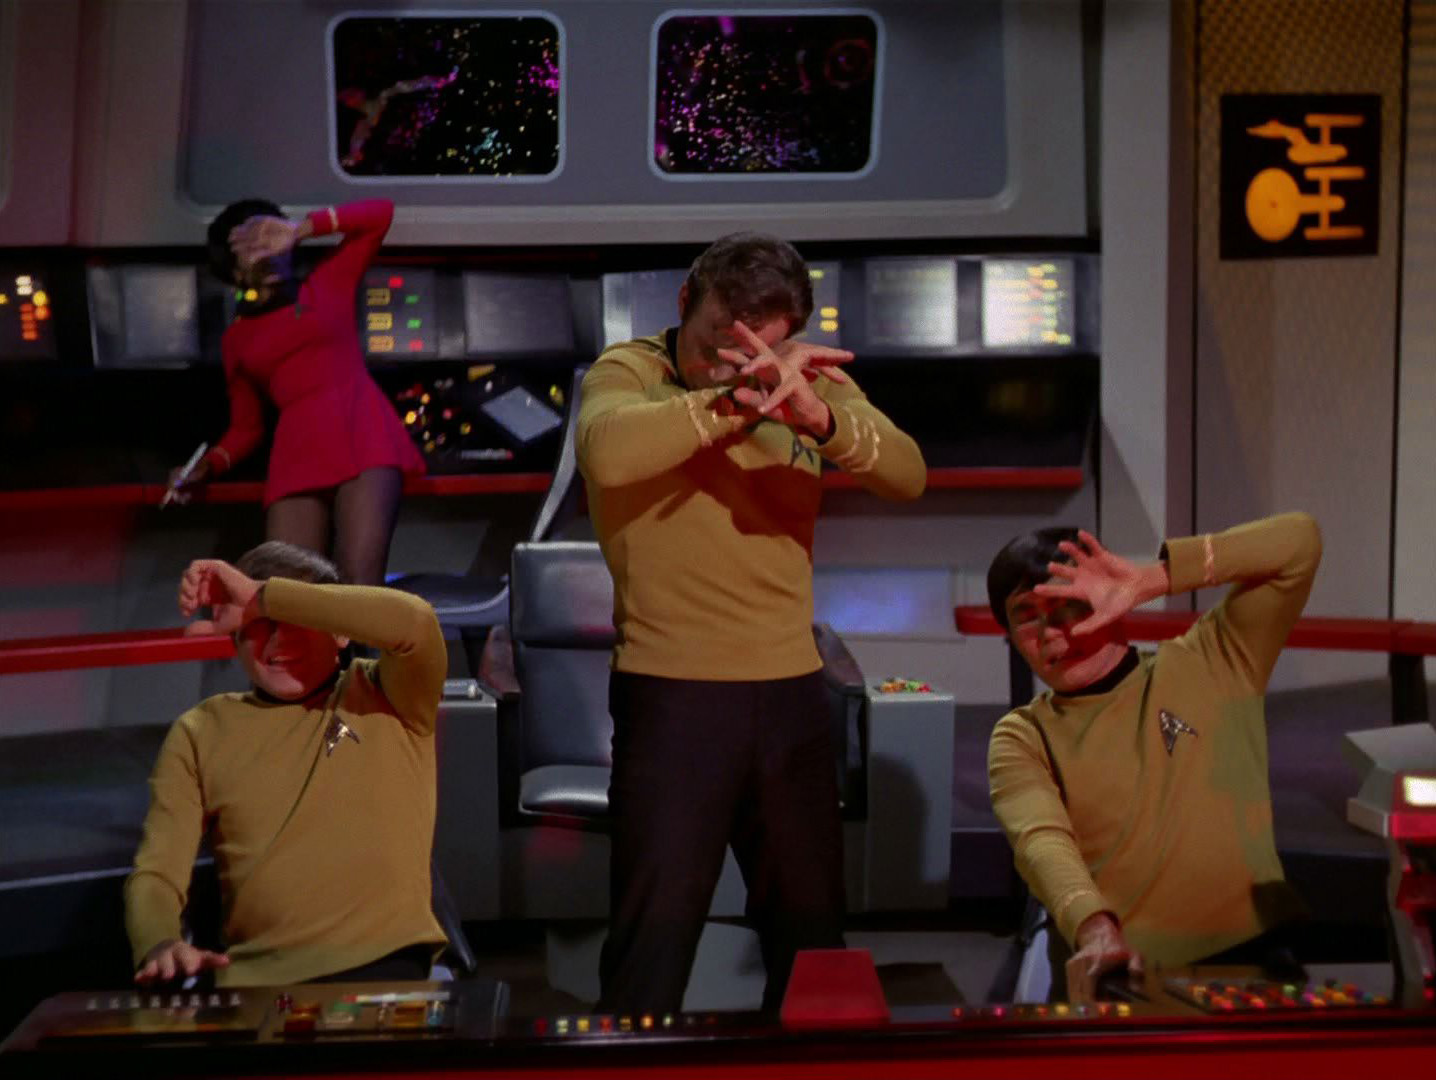 Attacking the crew of the Enterprise